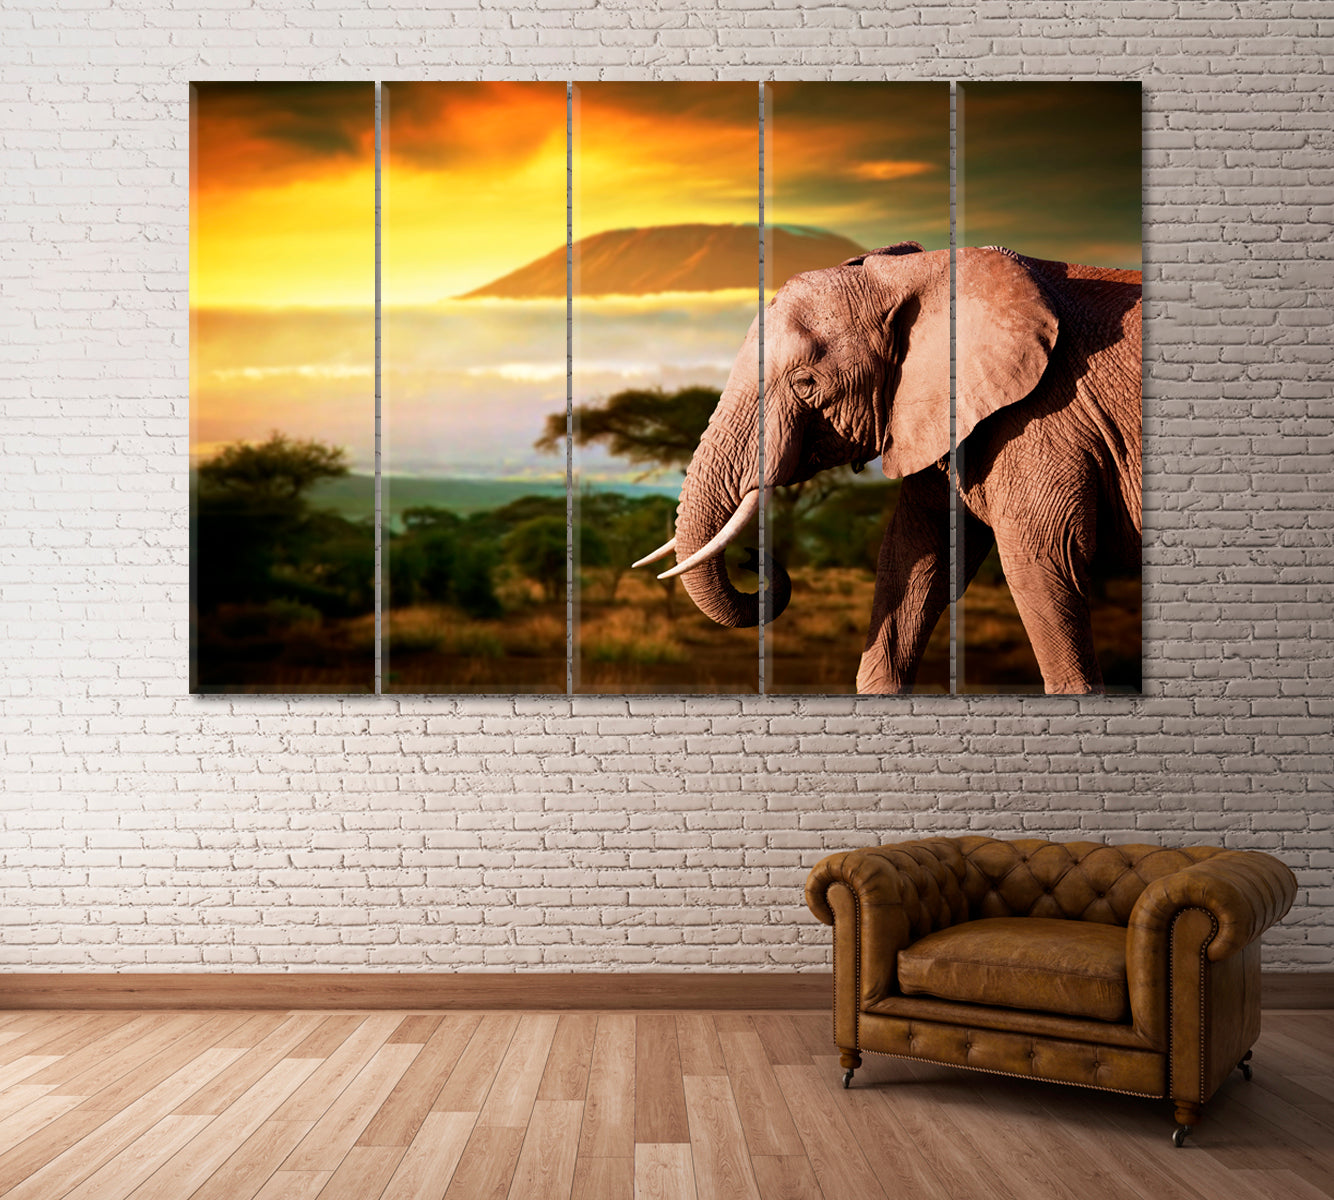 Elephant and Mount Kilimanjaro at Sunset Canvas Print ArtLexy 5 Panels 36"x24" inches 